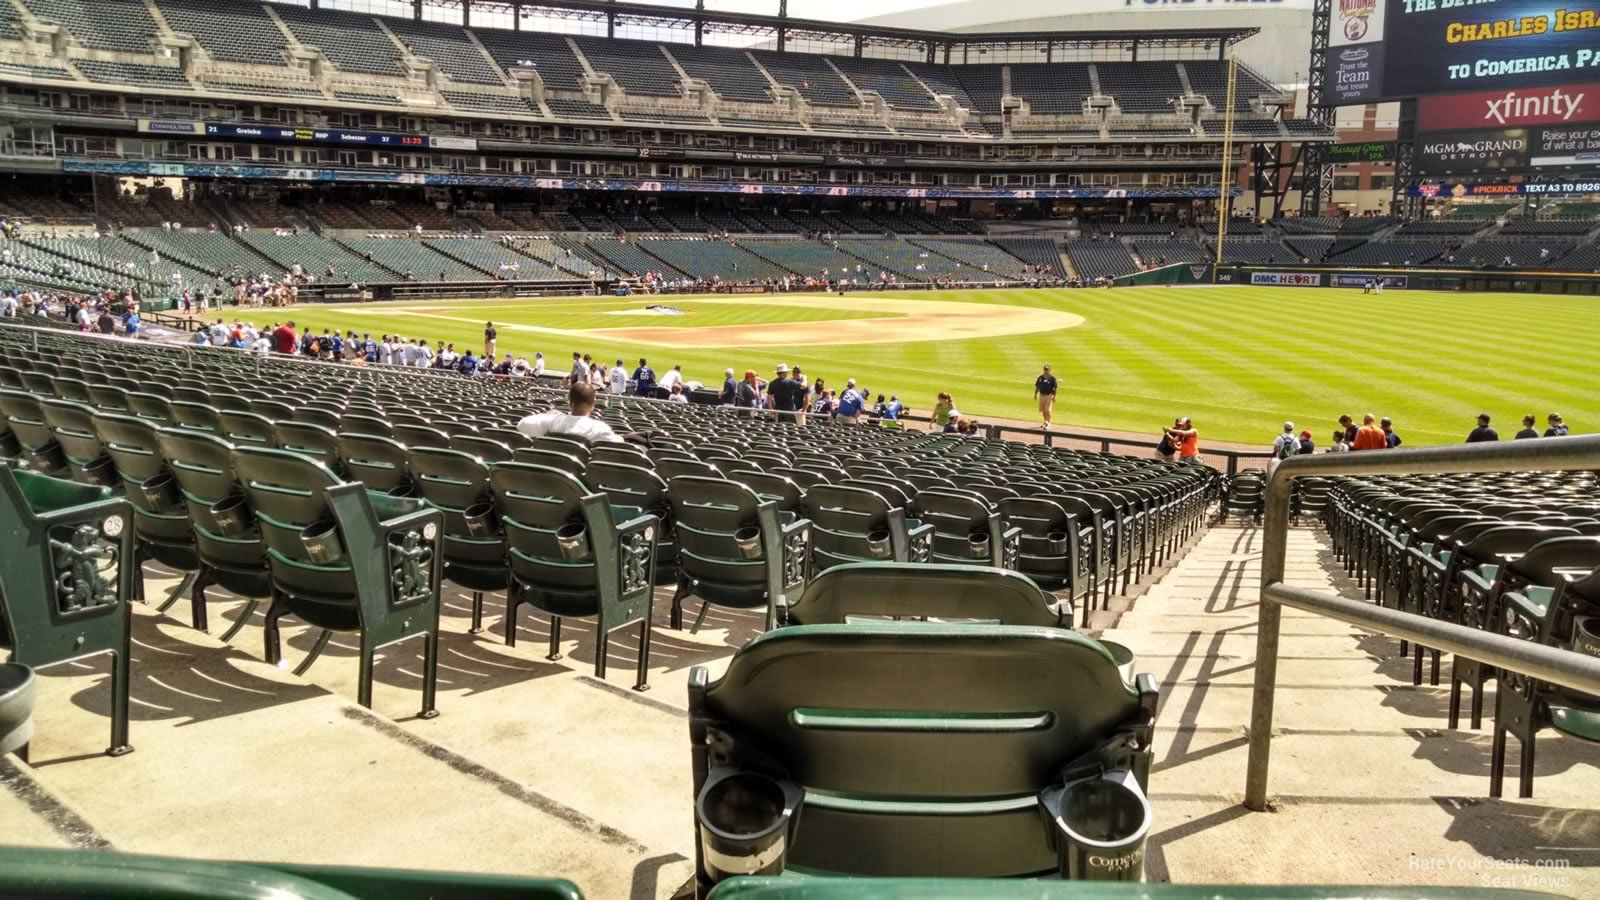 Section 115 at Comerica Park 